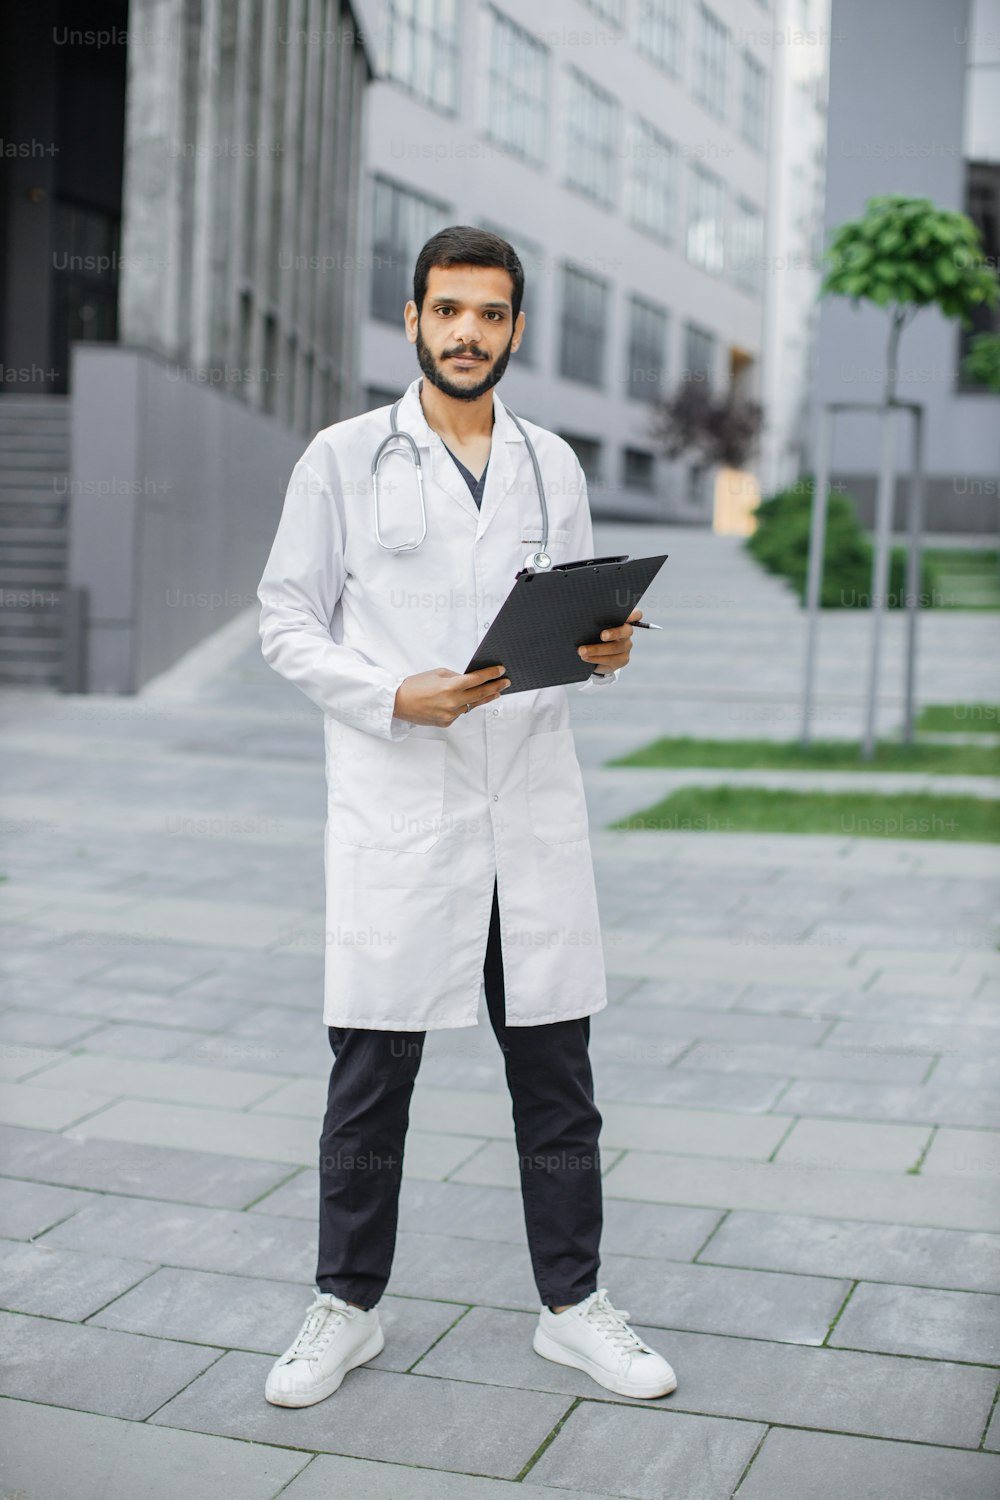 Full length portrait of young handsome bearded Arabian man doctor healthcare worker in white coat, standing with clipboard folder in hands outdoors in front of modern hospital or clinic